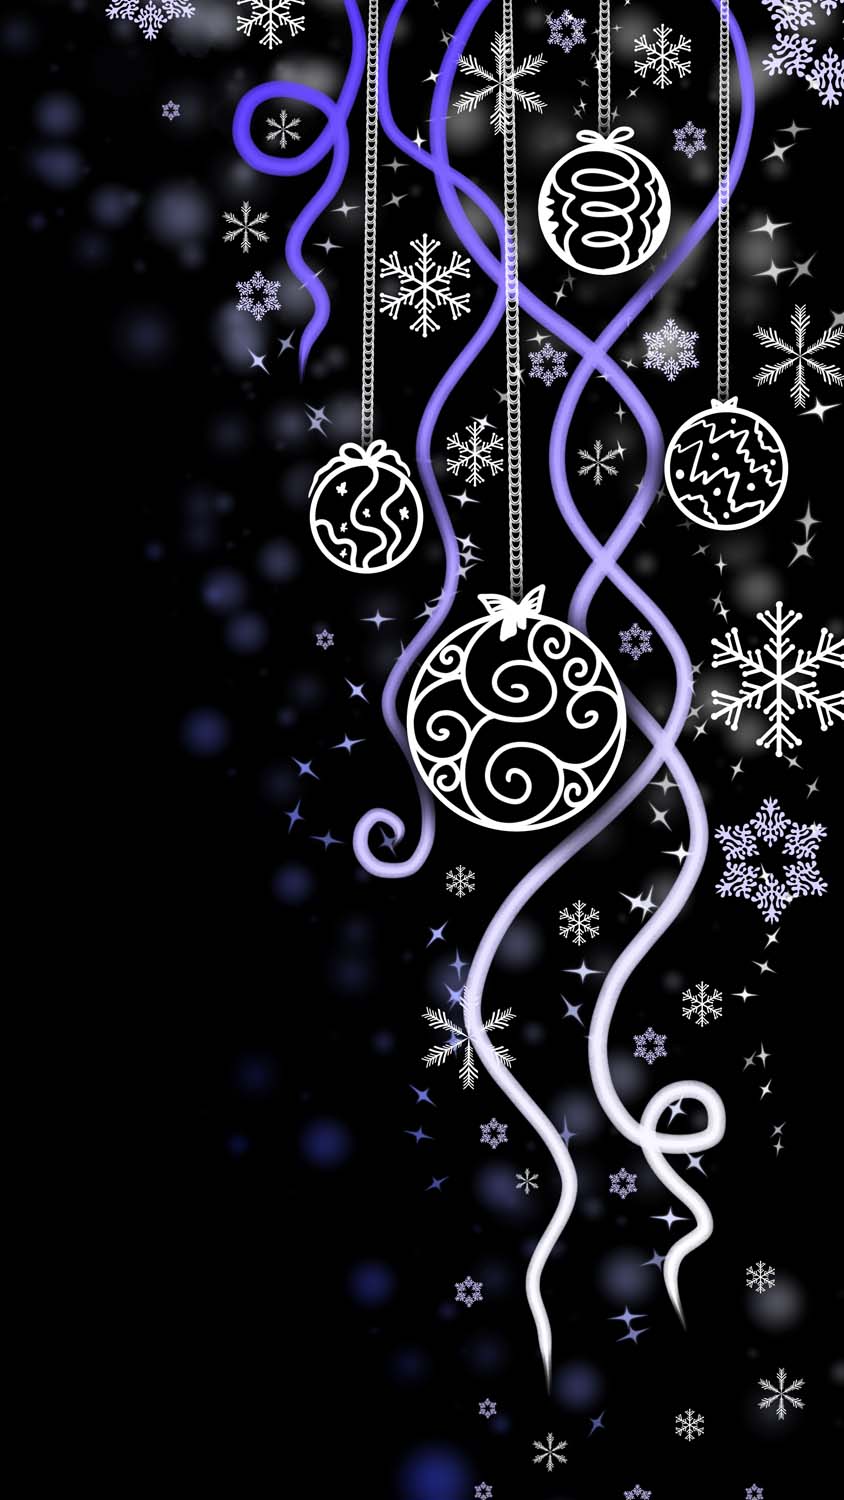 Christmas Decoration Ornaments IPhone Wallpaper HD - IPhone Wallpapers : iPhone  Wallpapers